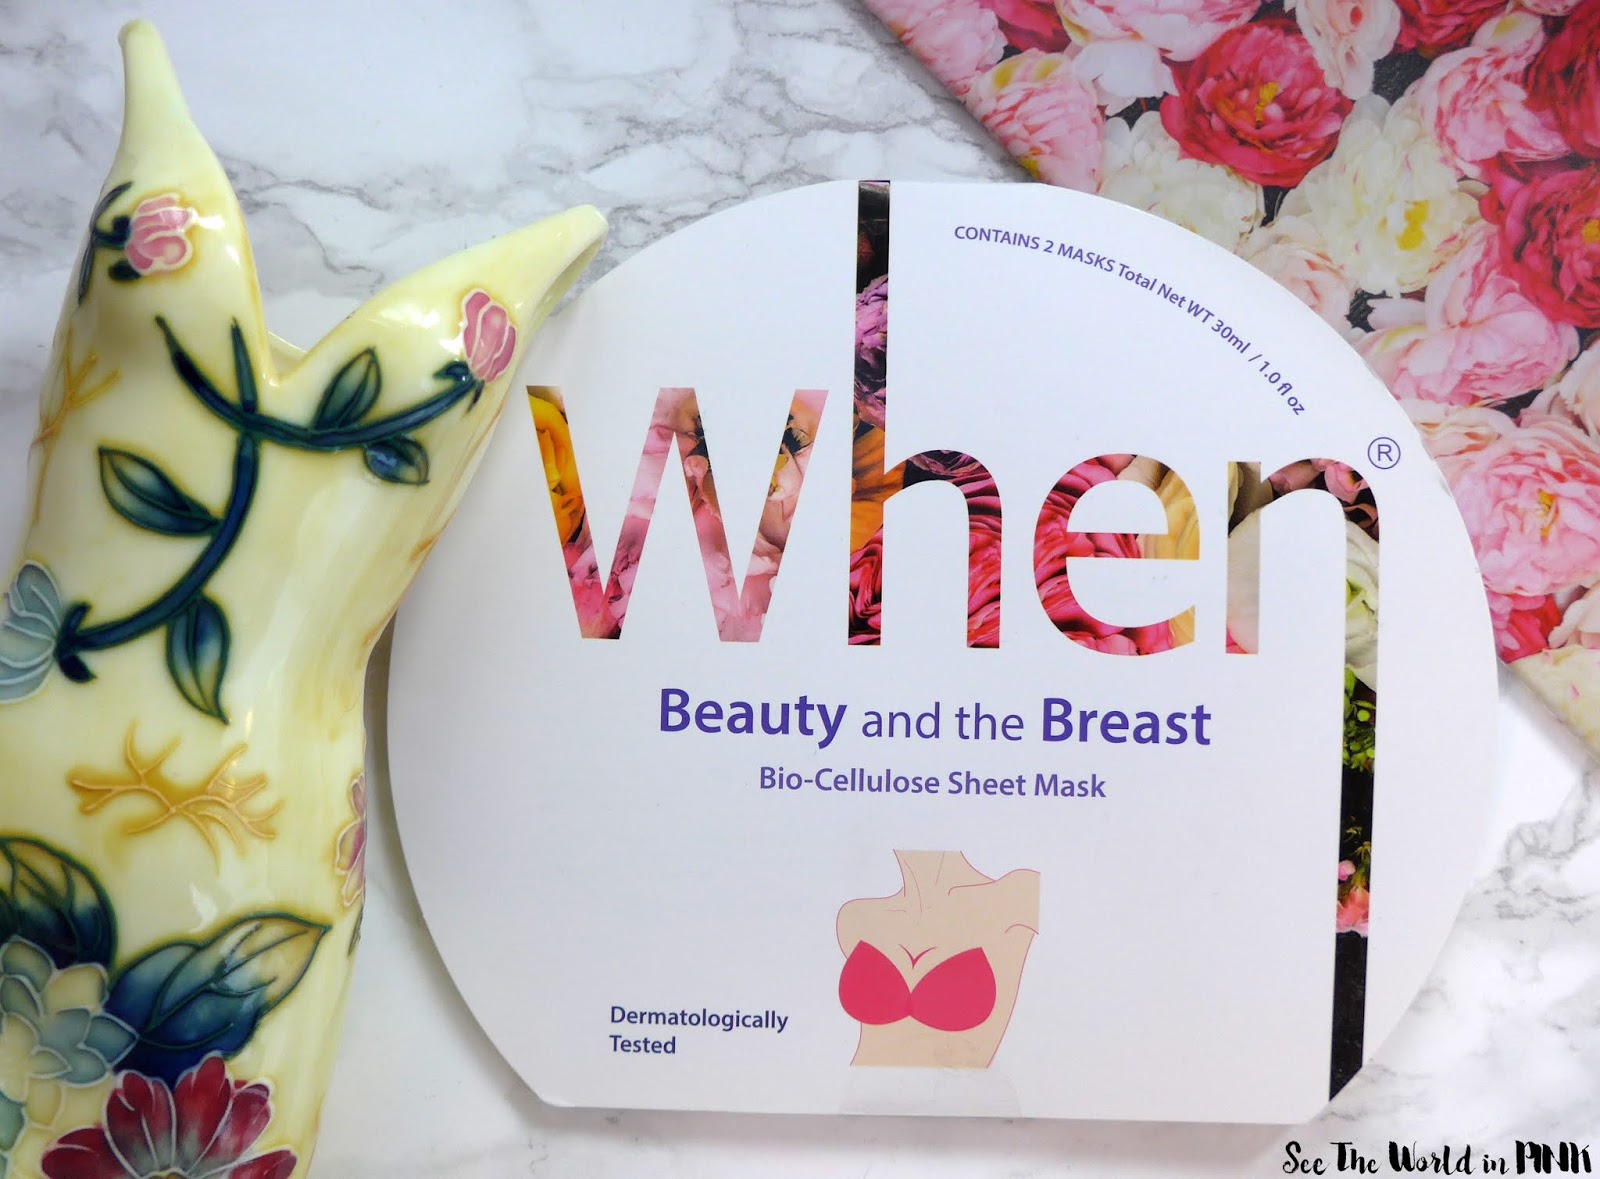 Skincare Sunday - When Beauty and the Breast Bio-Cellulose Body Sheet Mask